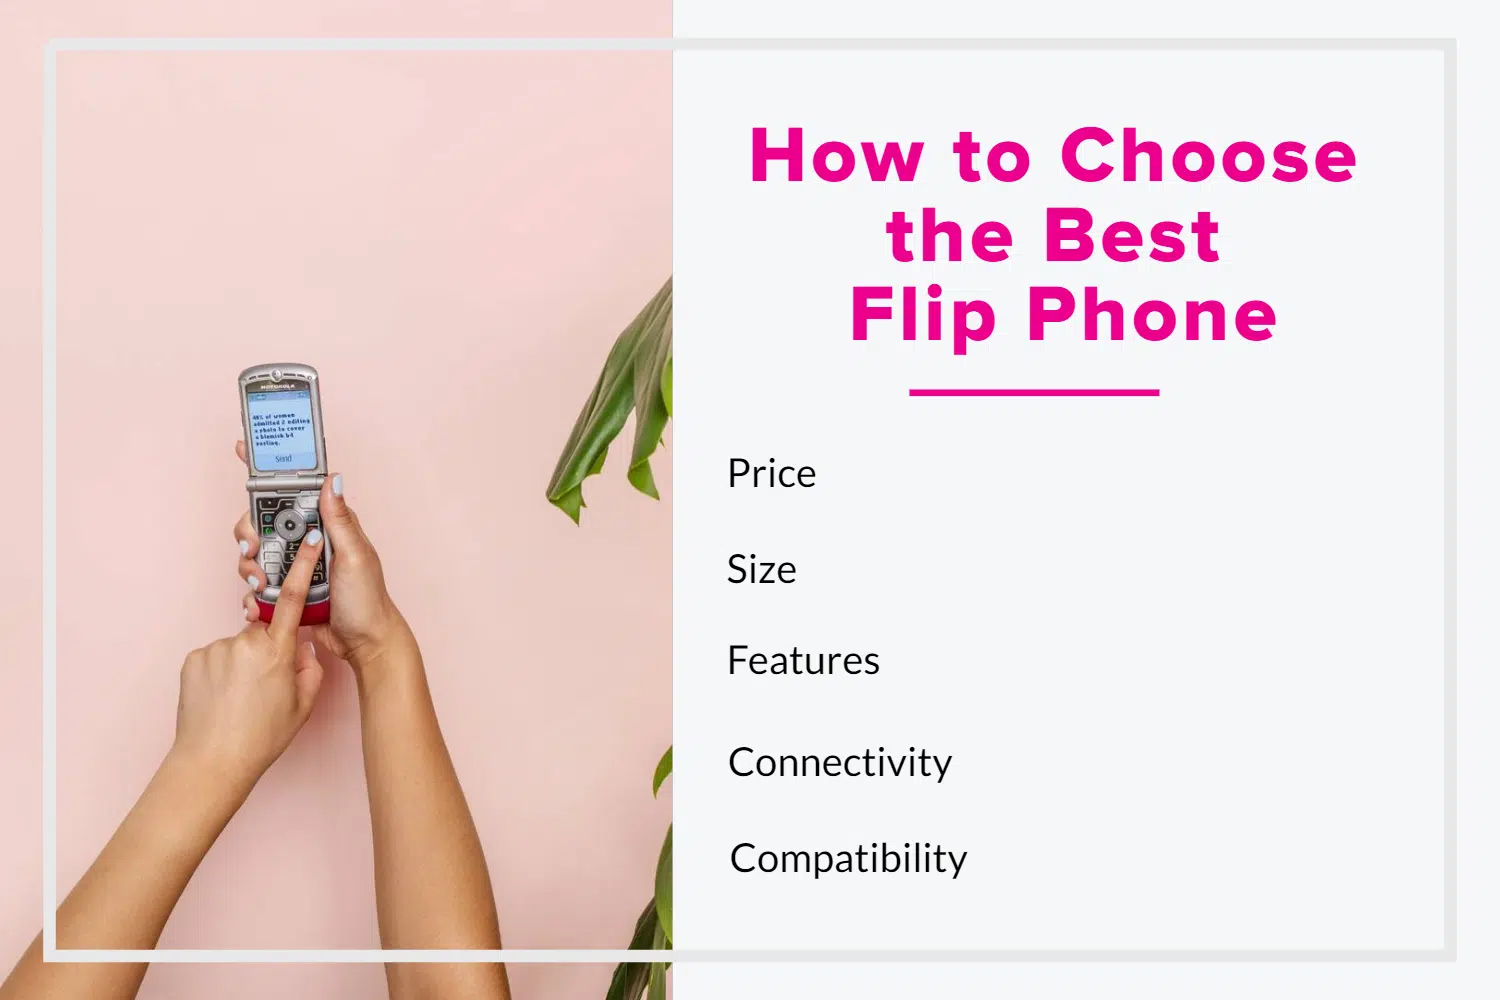 How to Choose the Best Flip Phone